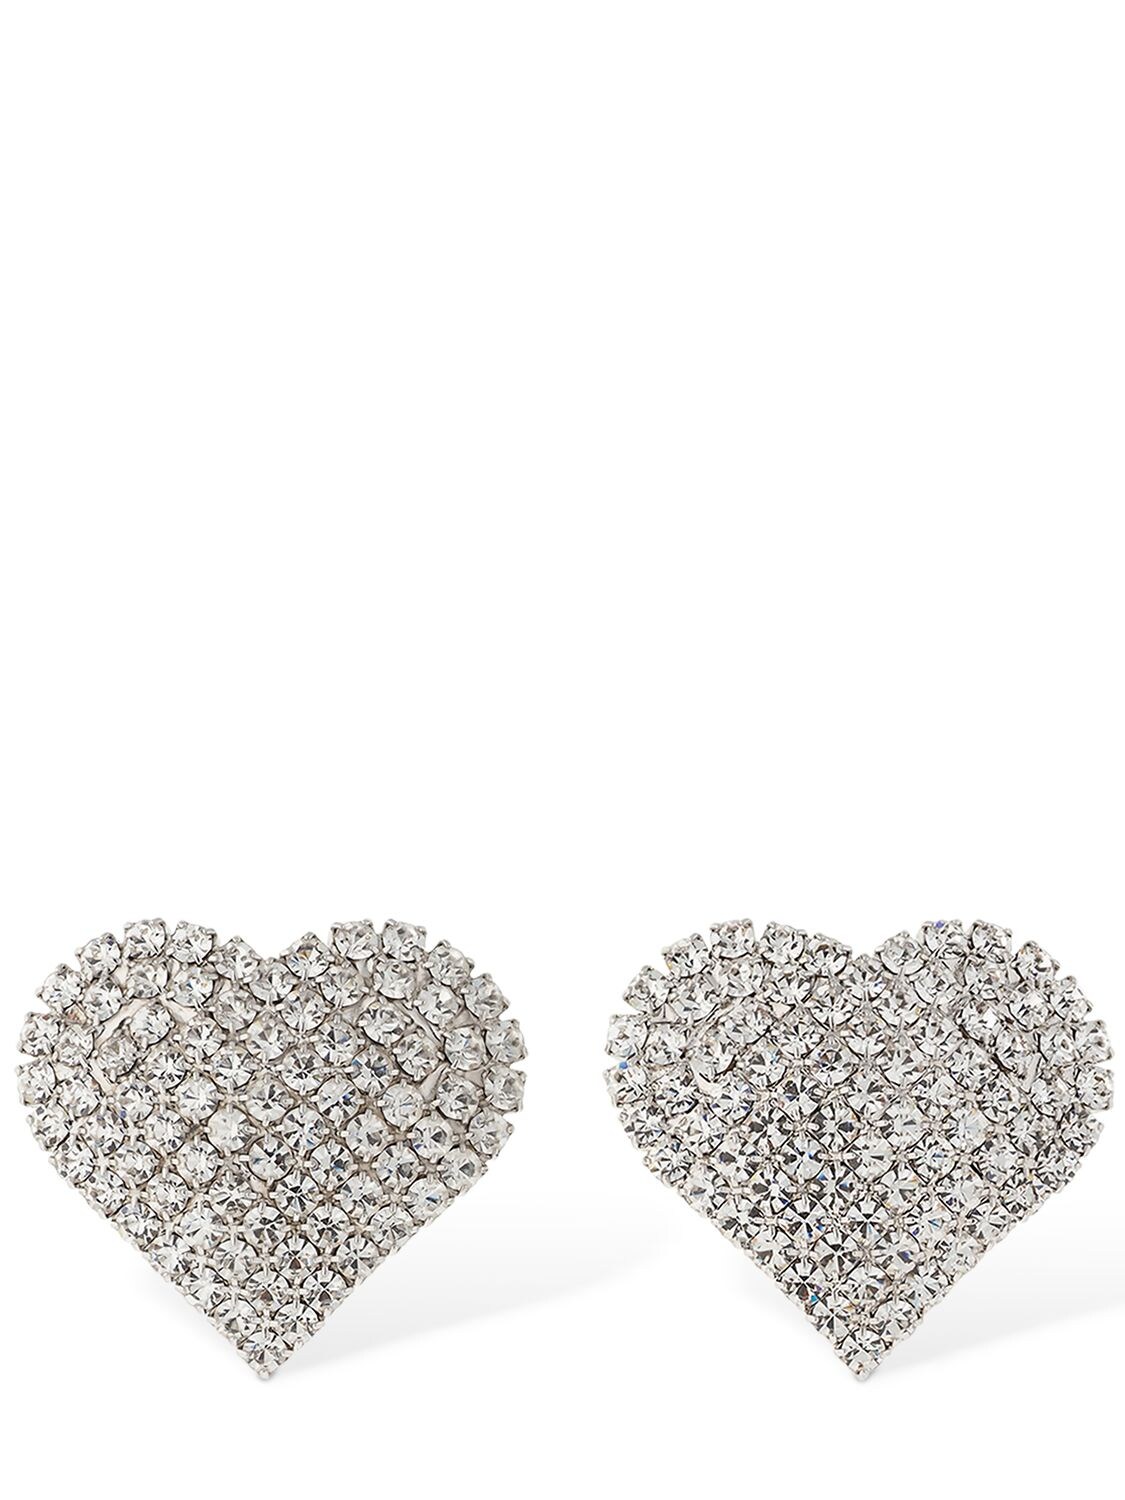 ALESSANDRA RICH SMALL CRYSTAL HEART CLIP-ON EARRINGS,71IWYS008-MDAXIENSWVNUQUW1